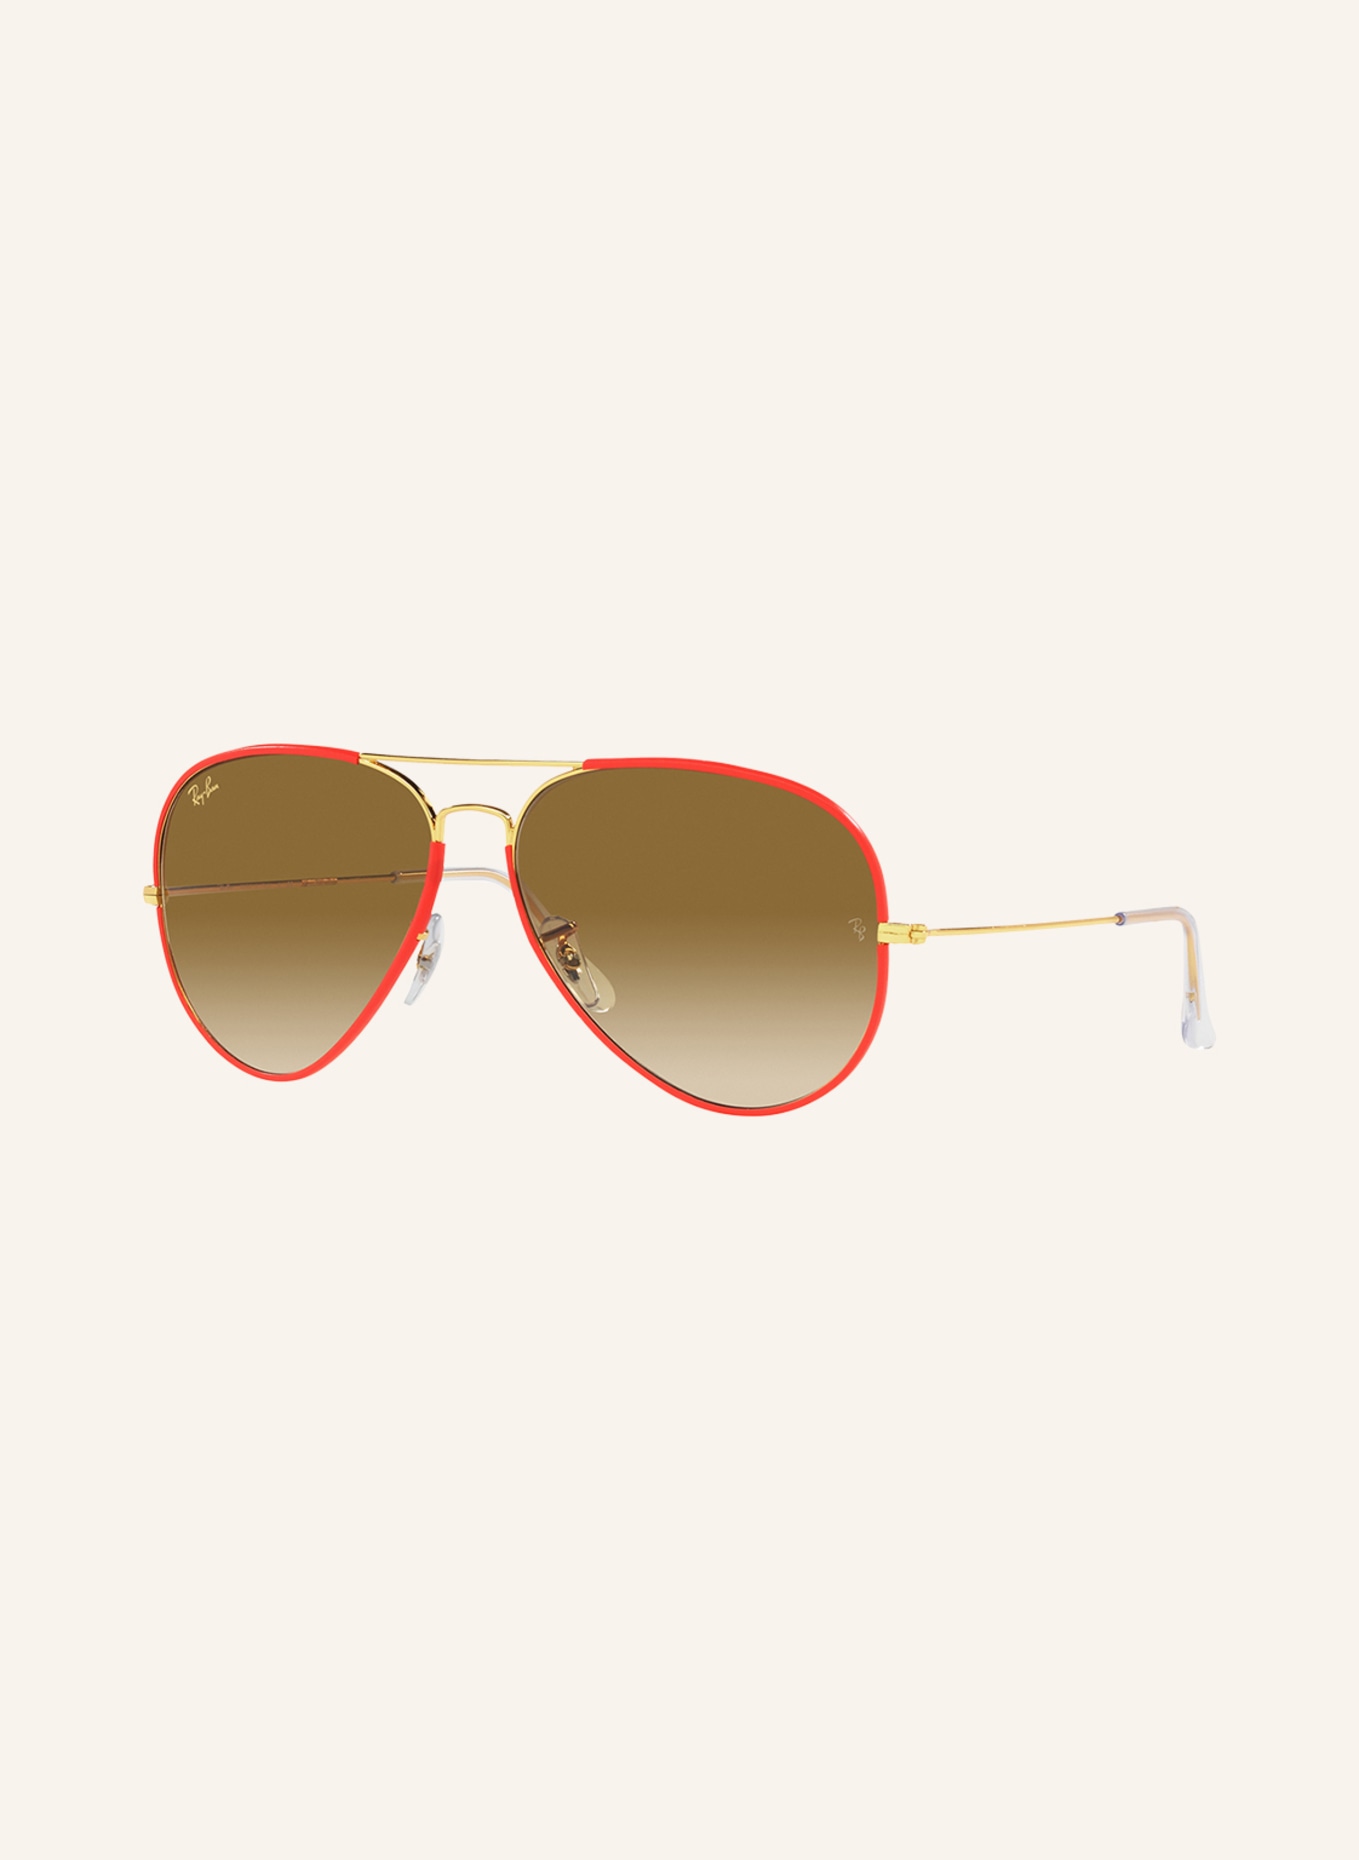 Ray-Ban Sunglasses RB3025, Color: 919651 - RED/BROWN GRADIENT (Image 1)